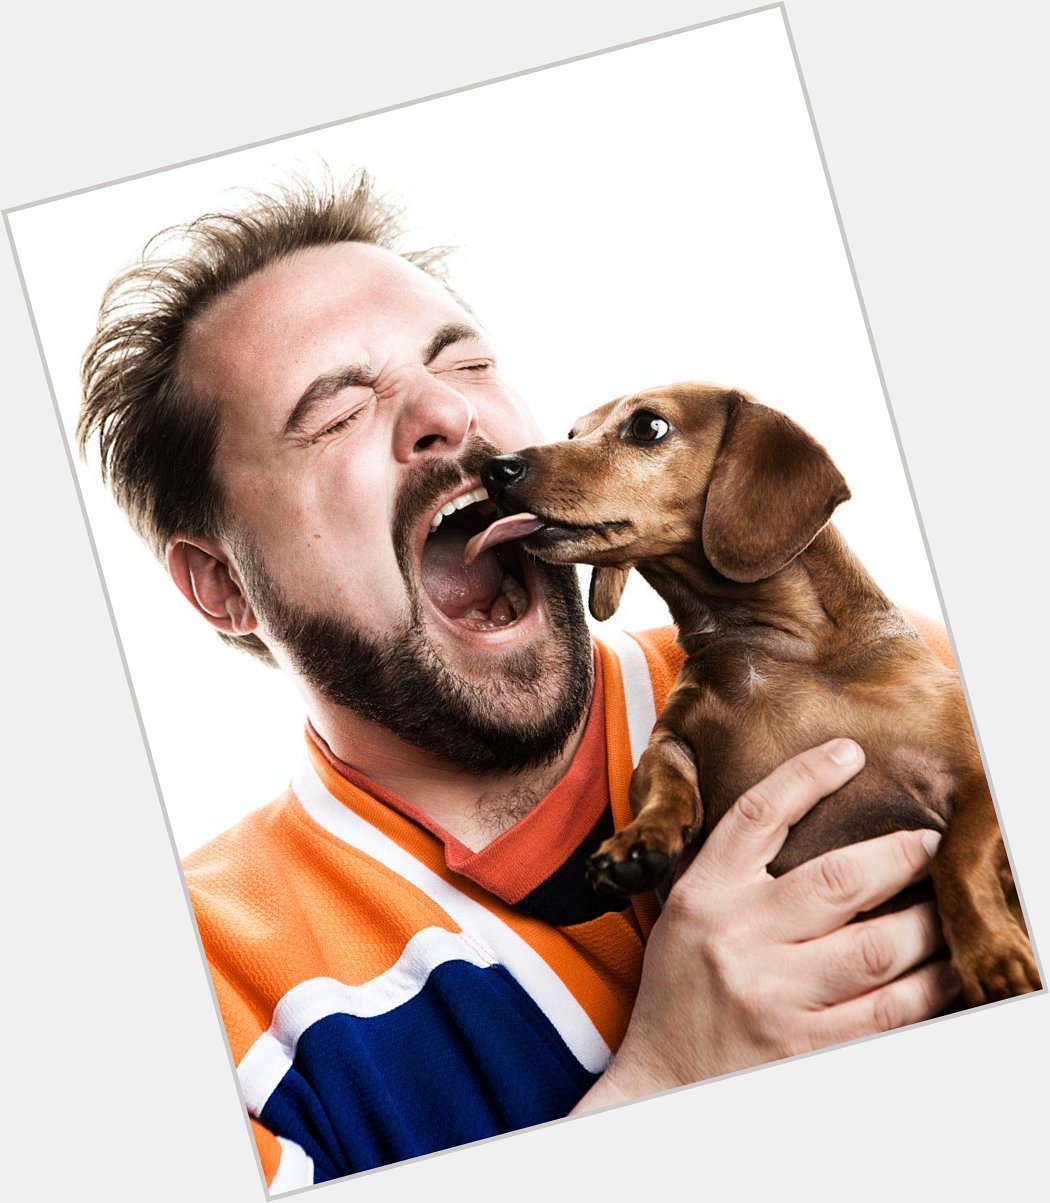 Happy Birthday to Kevin Smith who turns 47 today! 